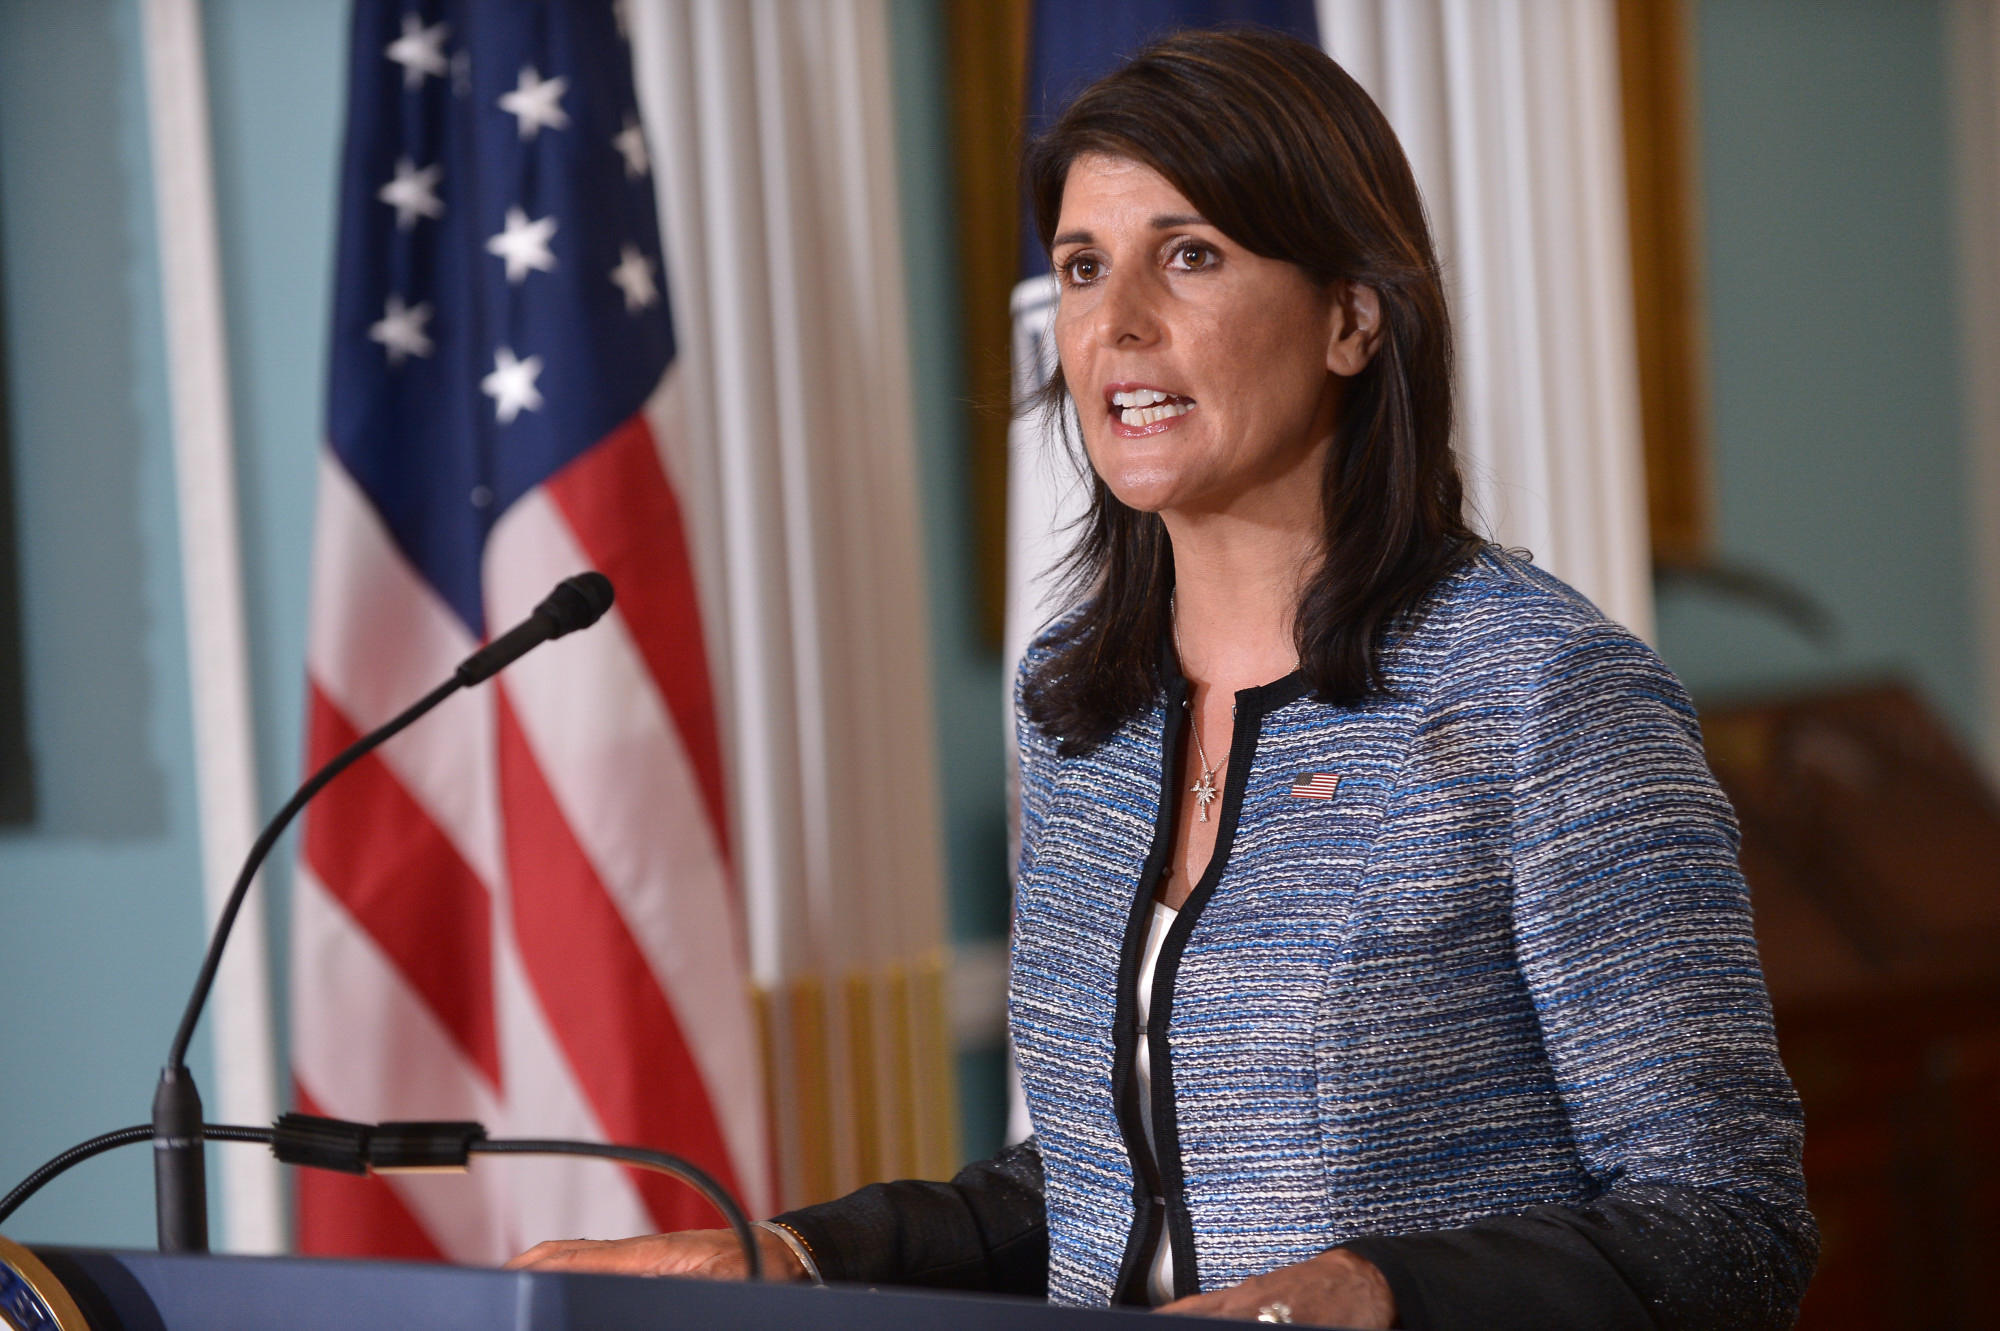 Nikki Haley LOSES Nevada’s primary despite being the only candidate on ...